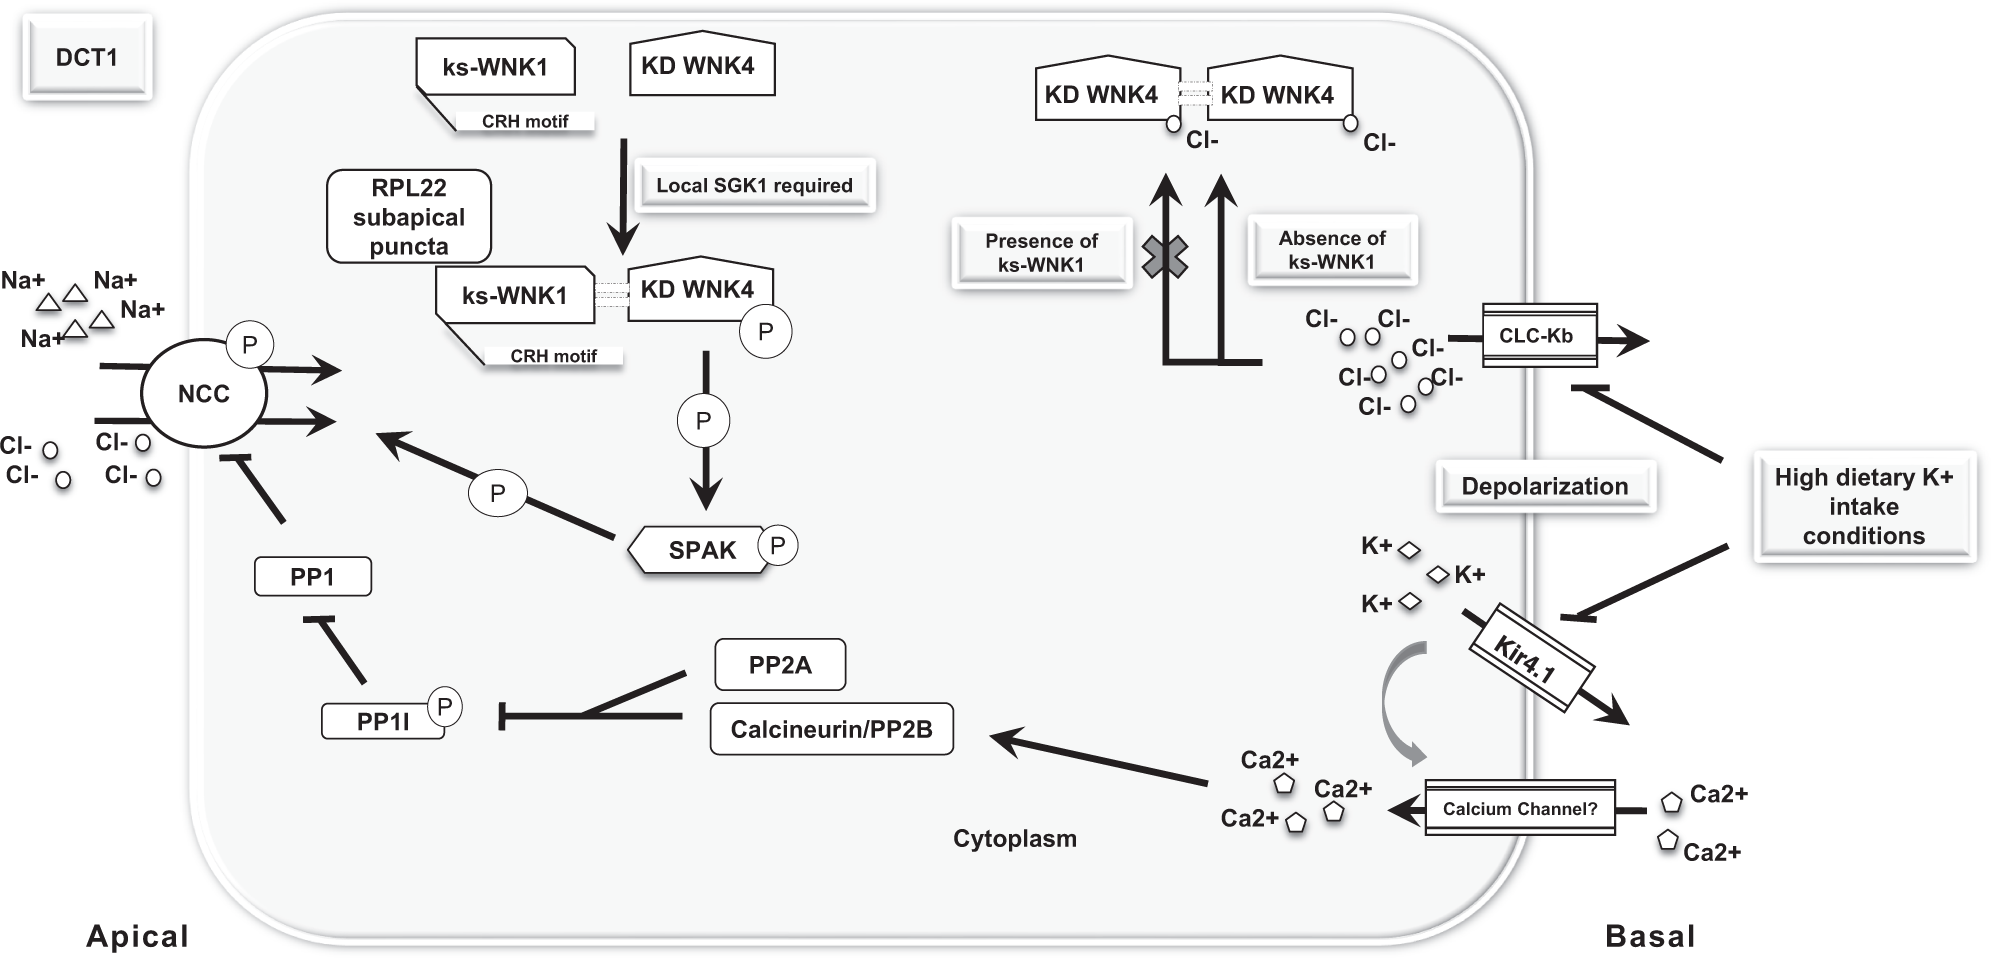 The interplay of renal potassium and sodium handling in blood pressure  regulation: critical role of the WNK-SPAK-NCC pathway | Journal of Human  Hypertension